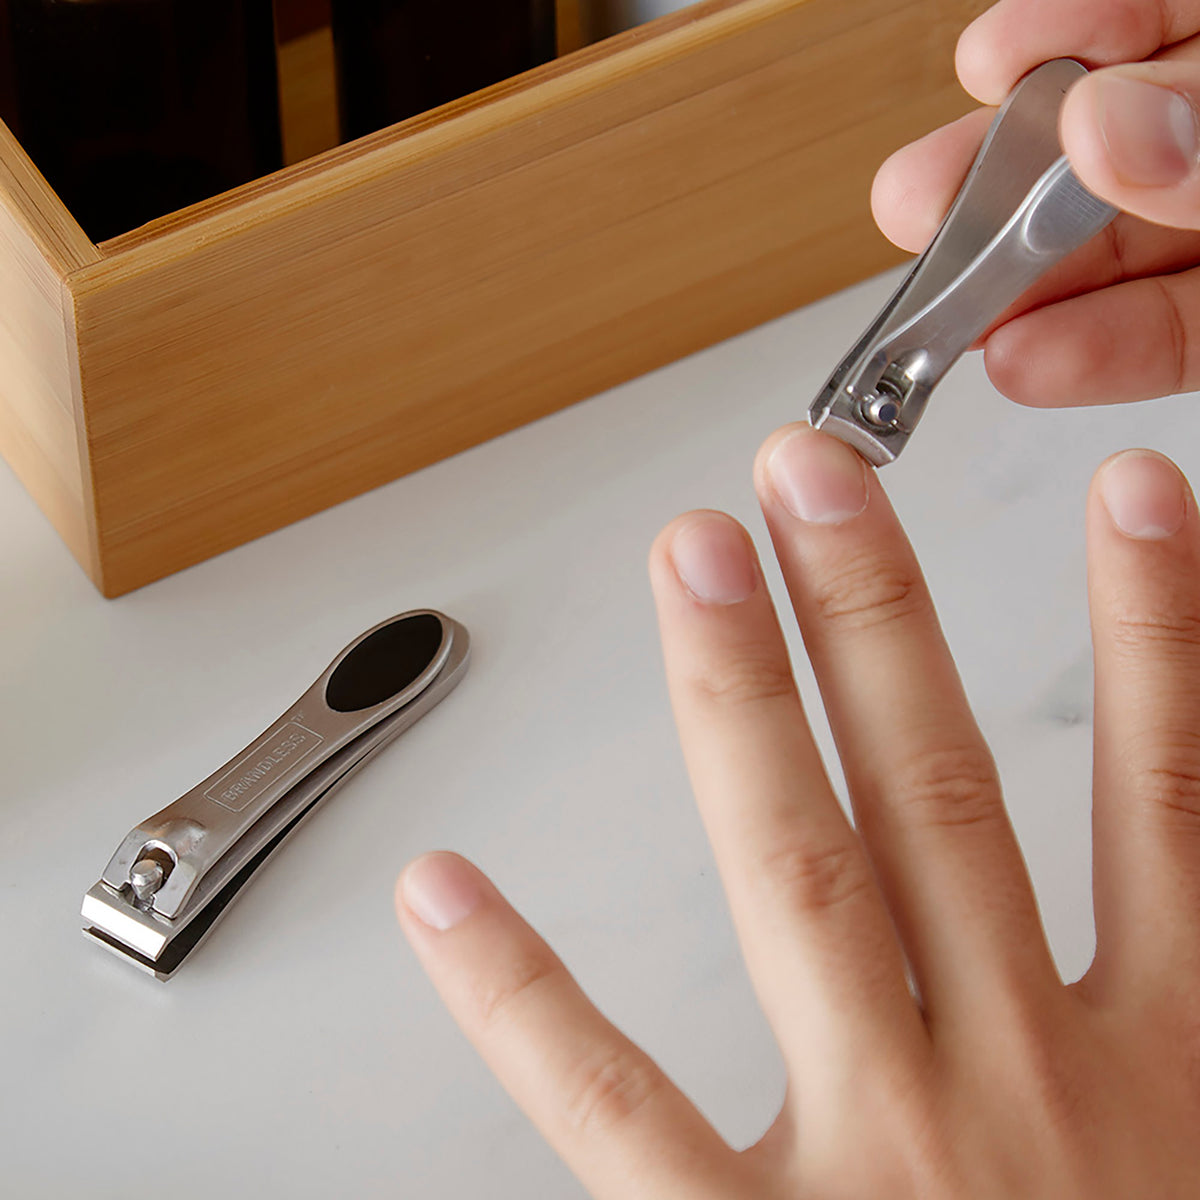 Woman demonstrates the use of the fingernail clipper on her left hand